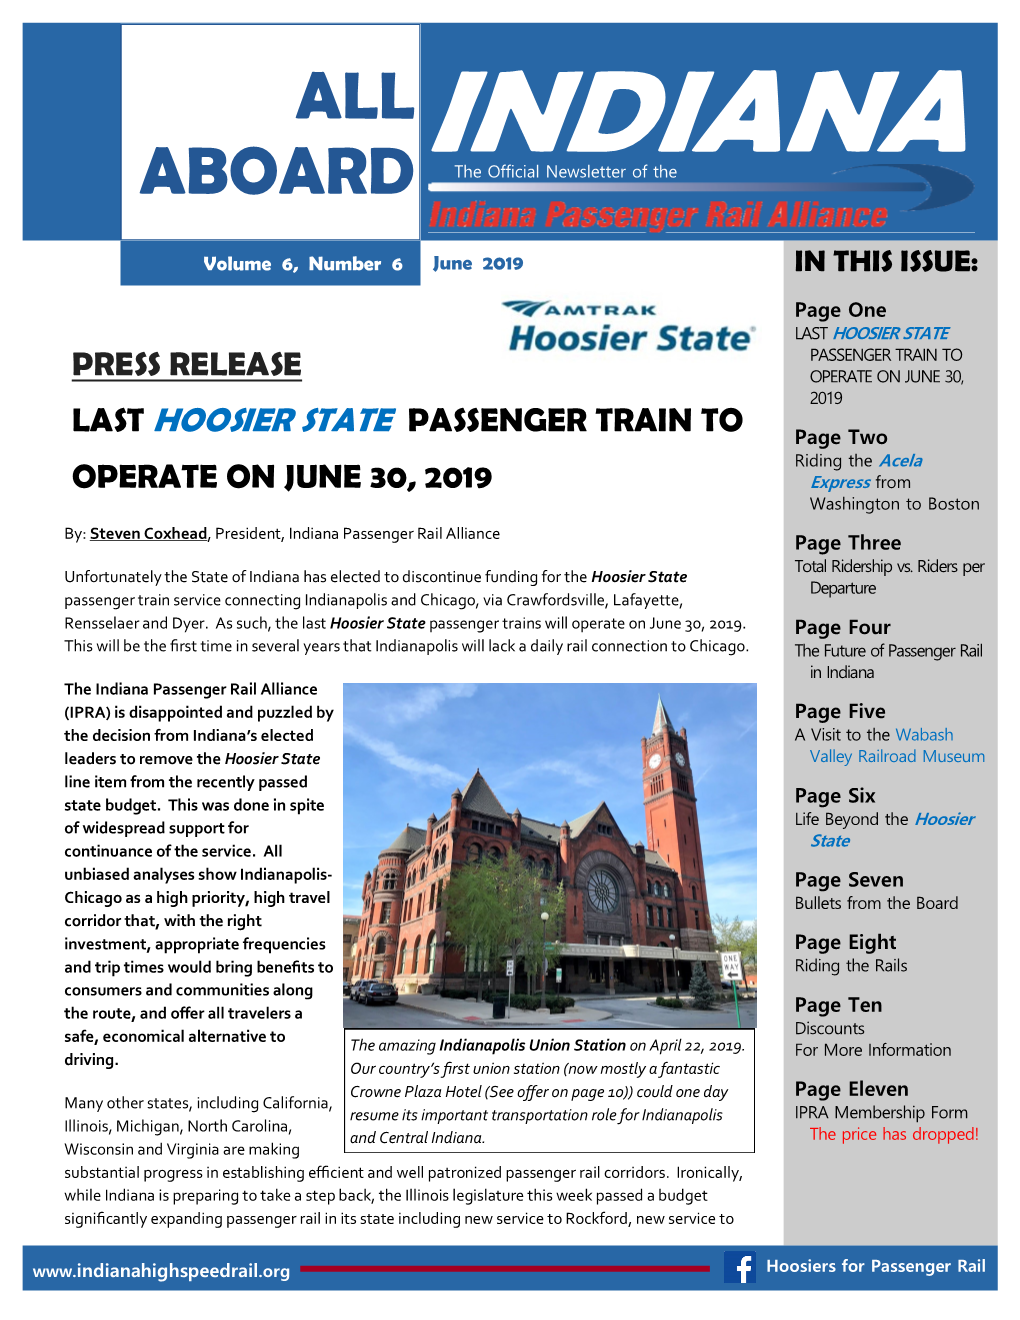 All Aboard Indiana June 2019